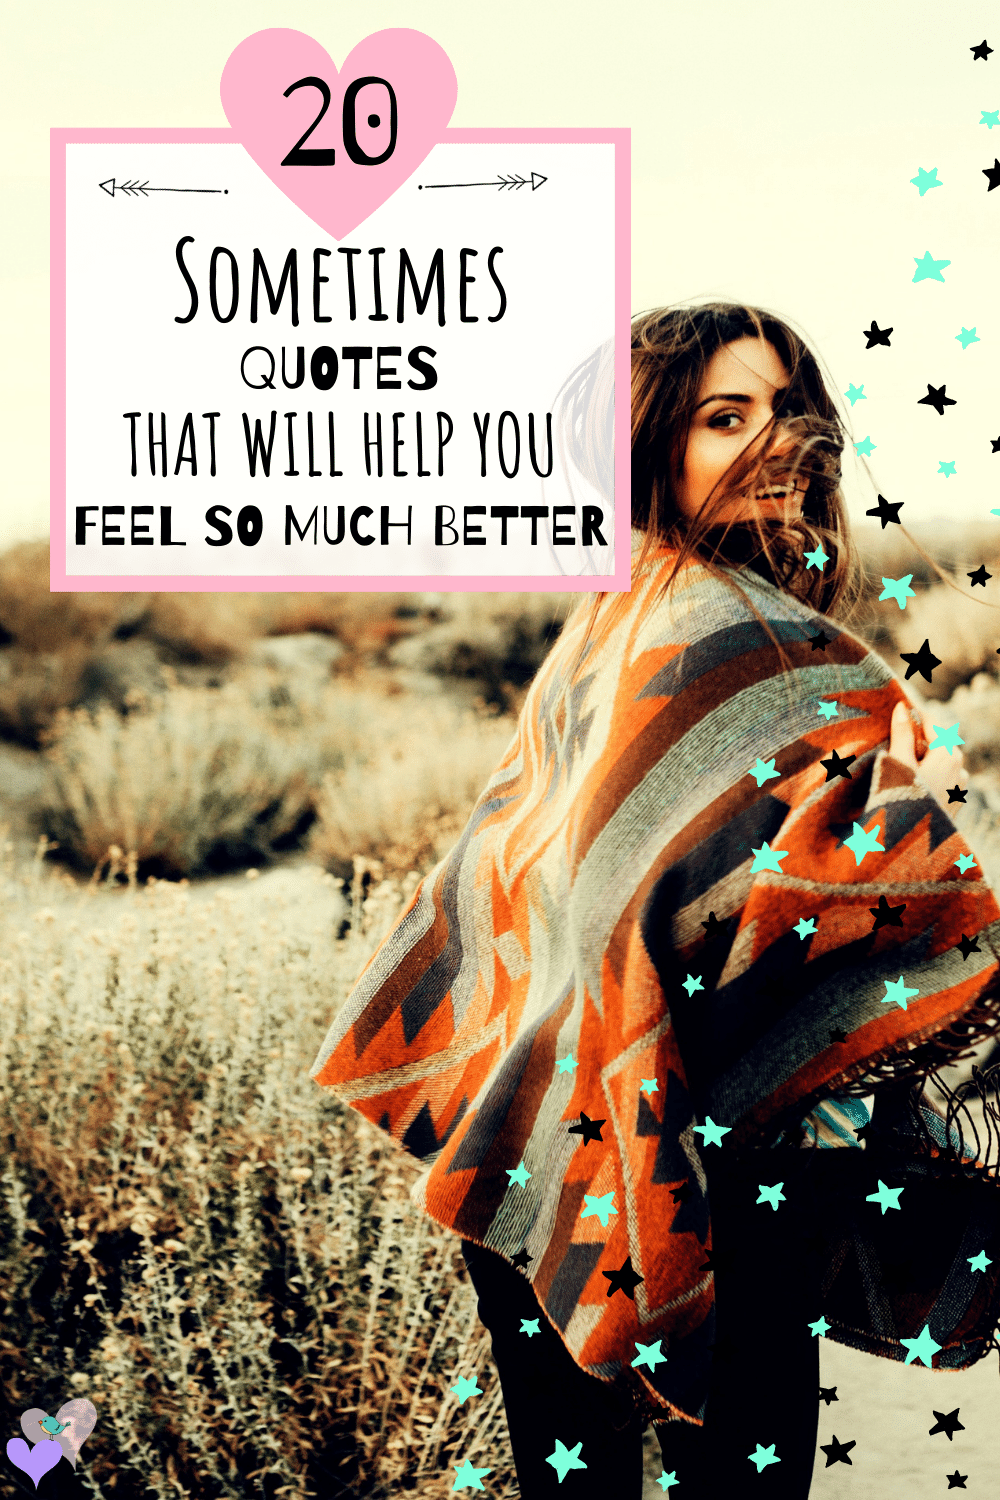 20 Sometimes quotes that will help you feel better during tough times! 